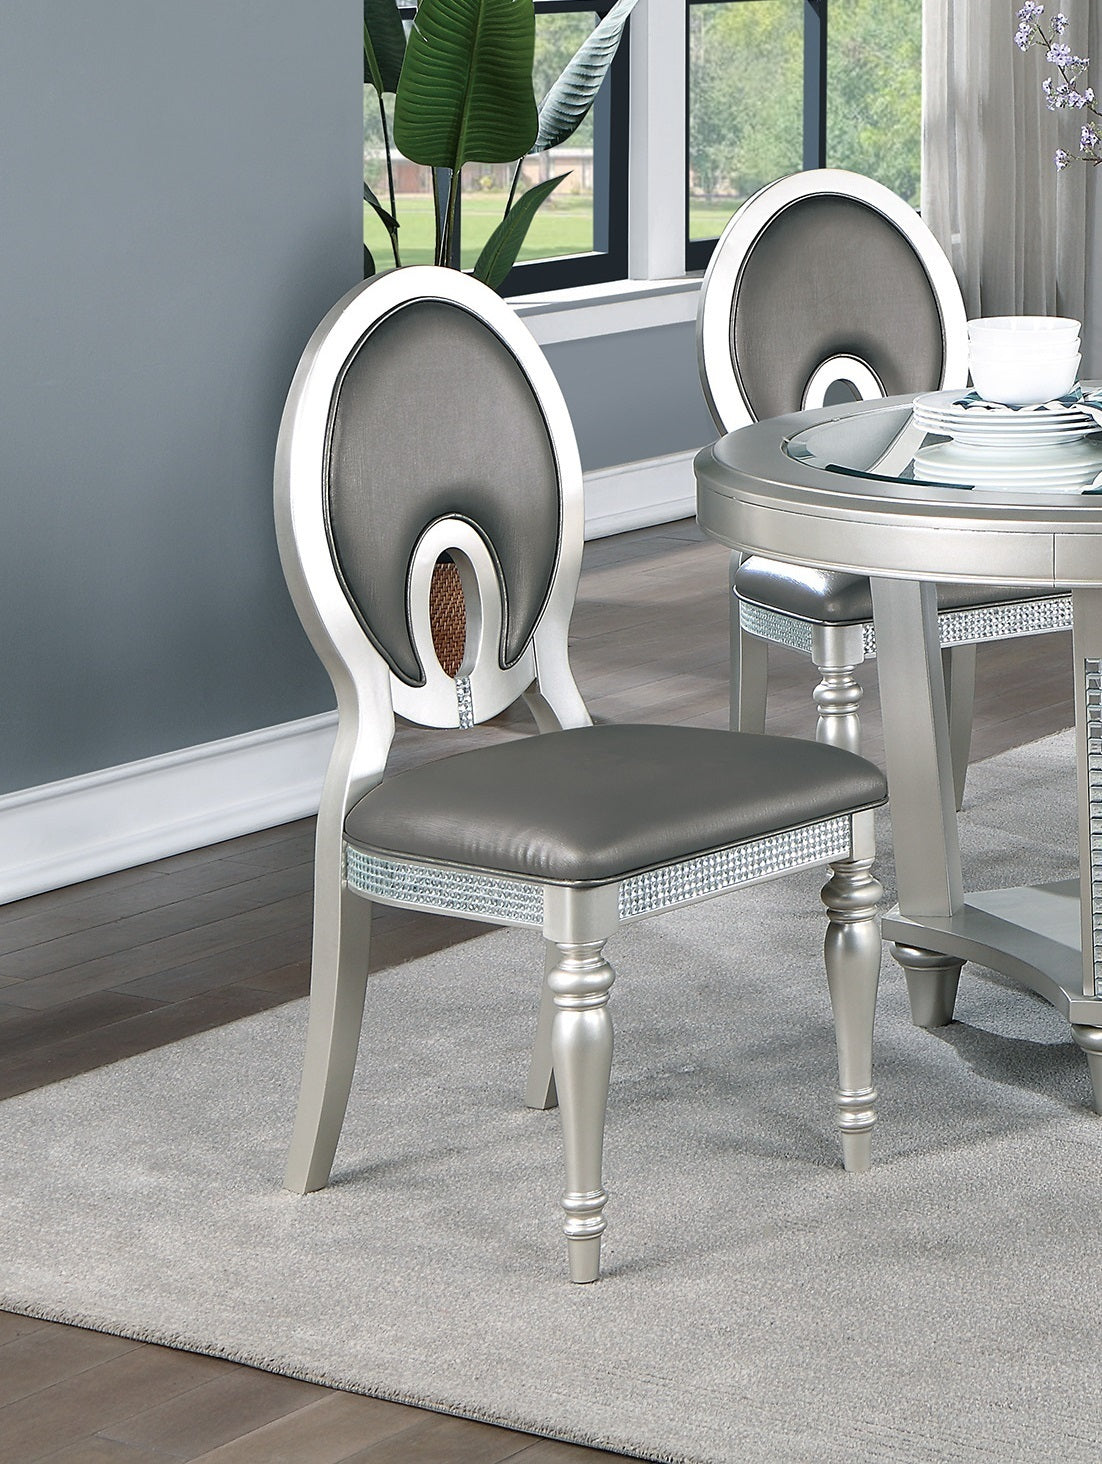 Formal Traditional Dining Room Furniture Chairs Set of 2 Chairs Dark Gray Hue Accent Silver Side Chair Cutout back Chair Cushion Seat